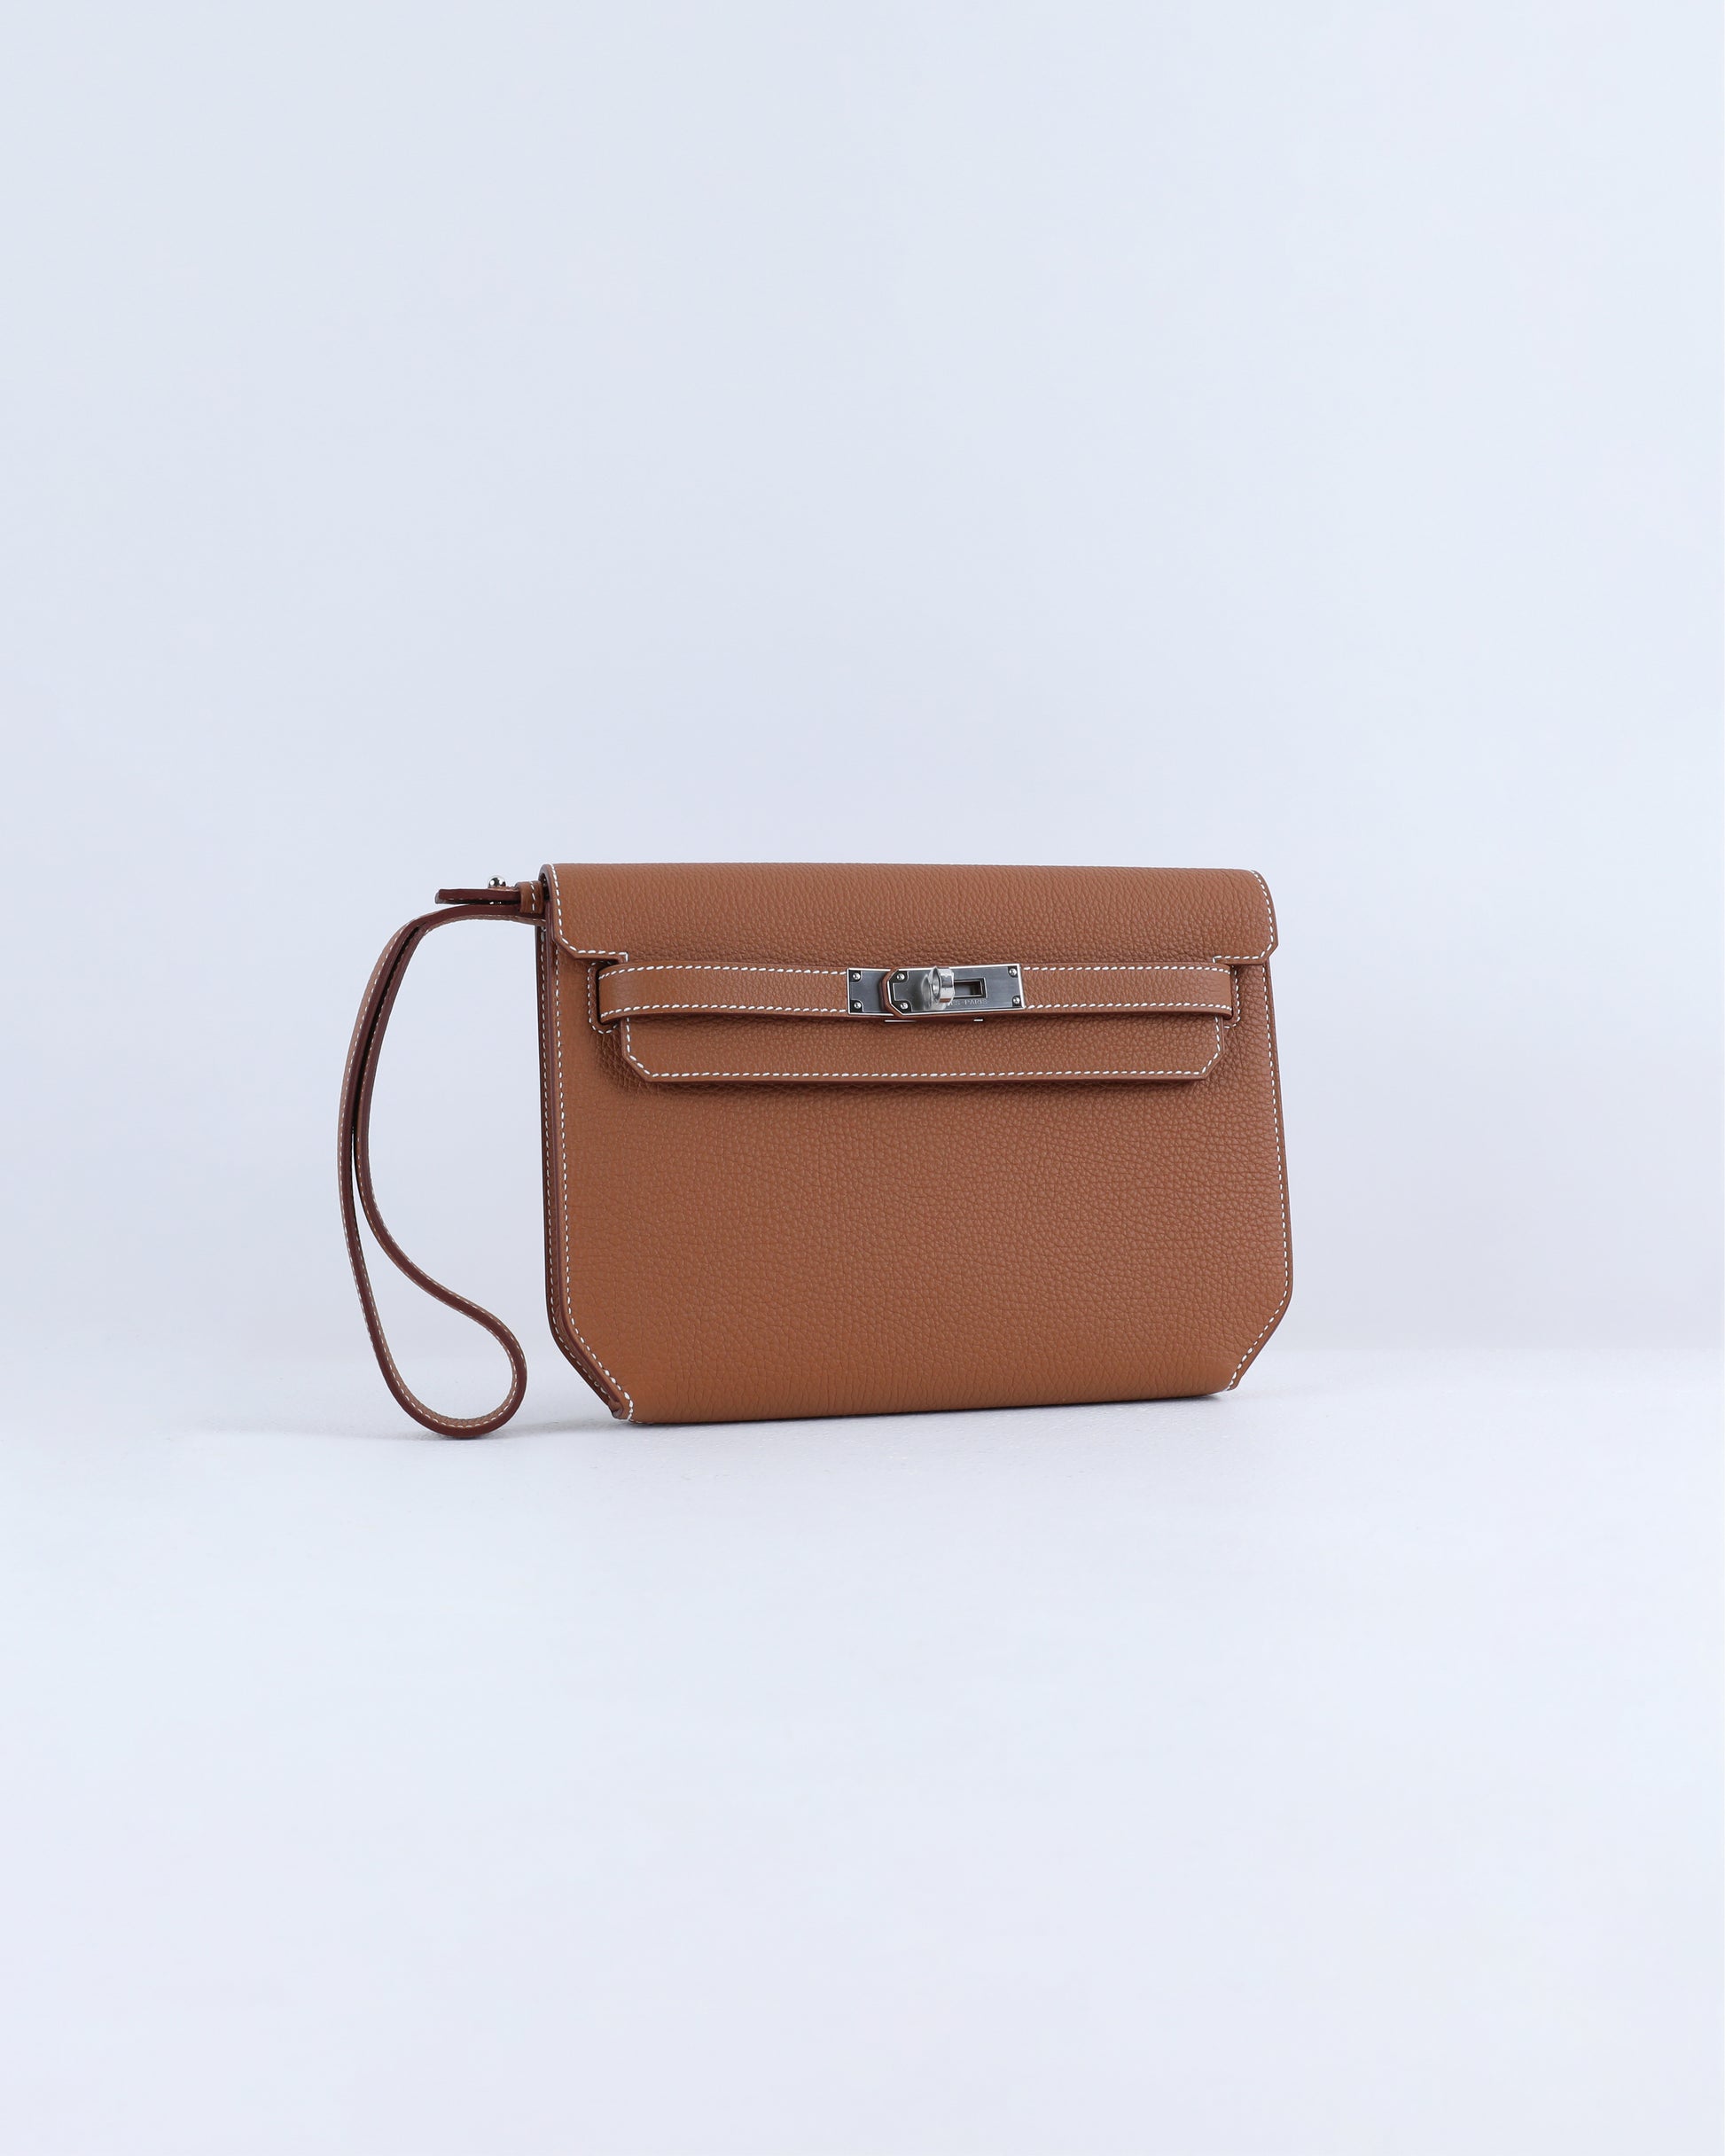 Kelly Depeches Leather Inspired Pouch Bag